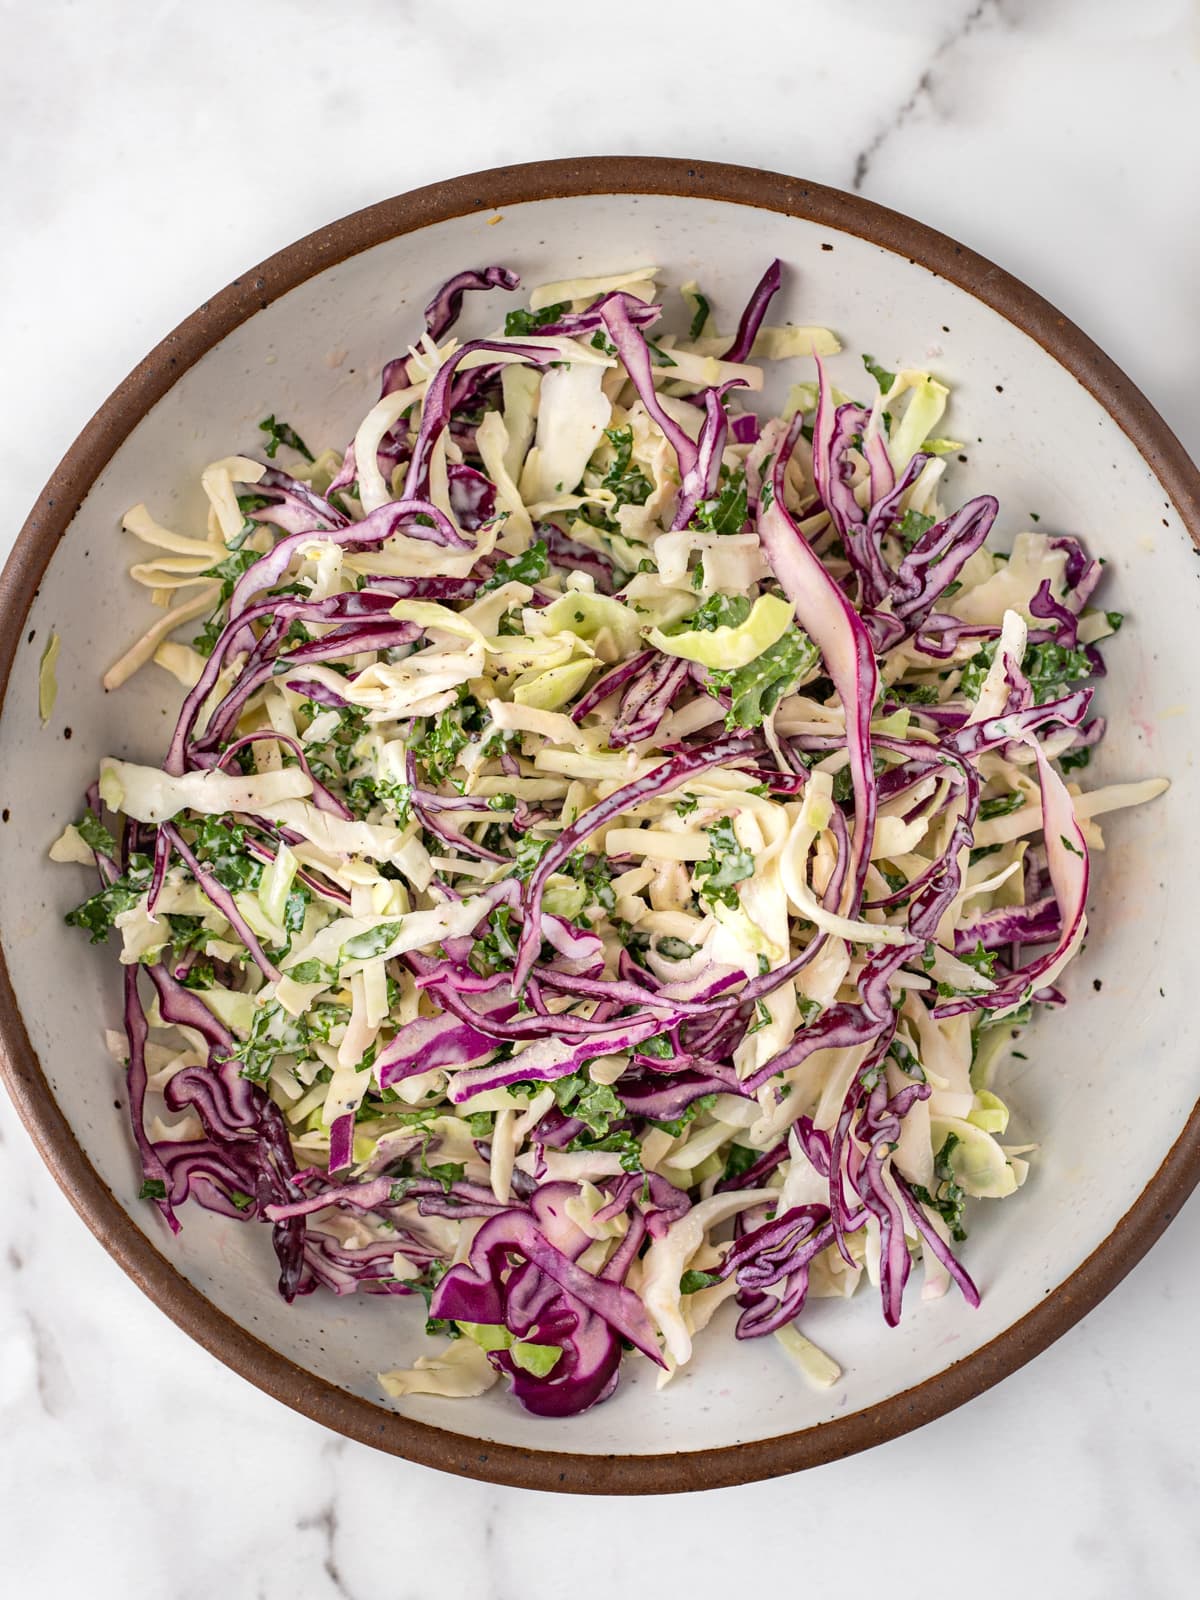 Bowlful of rainbow colored shredded cabbage in a dairy-free coleslaw dressing.